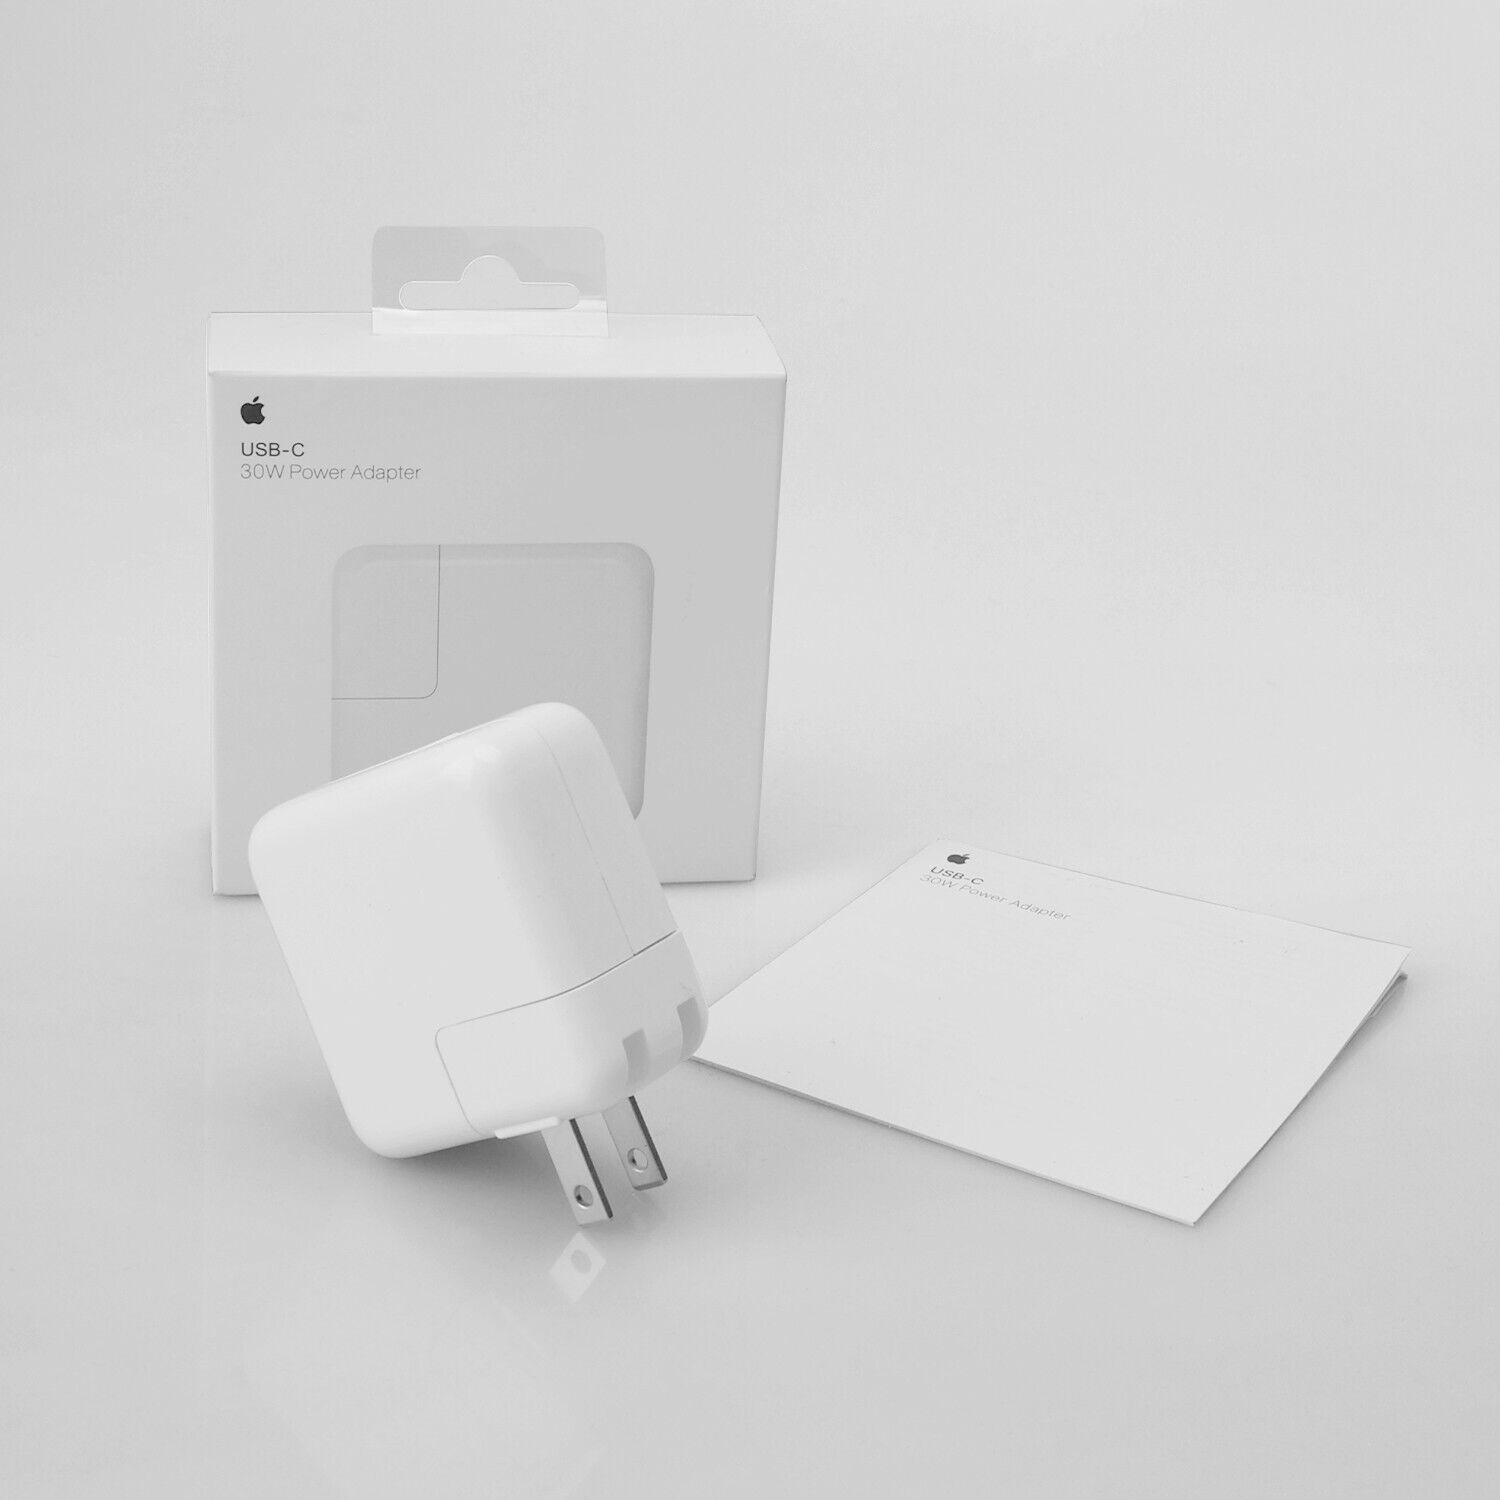 Genuine Apple 30W USB-C Power Adapter OEM CHARGER for iPad iPhone MacBook